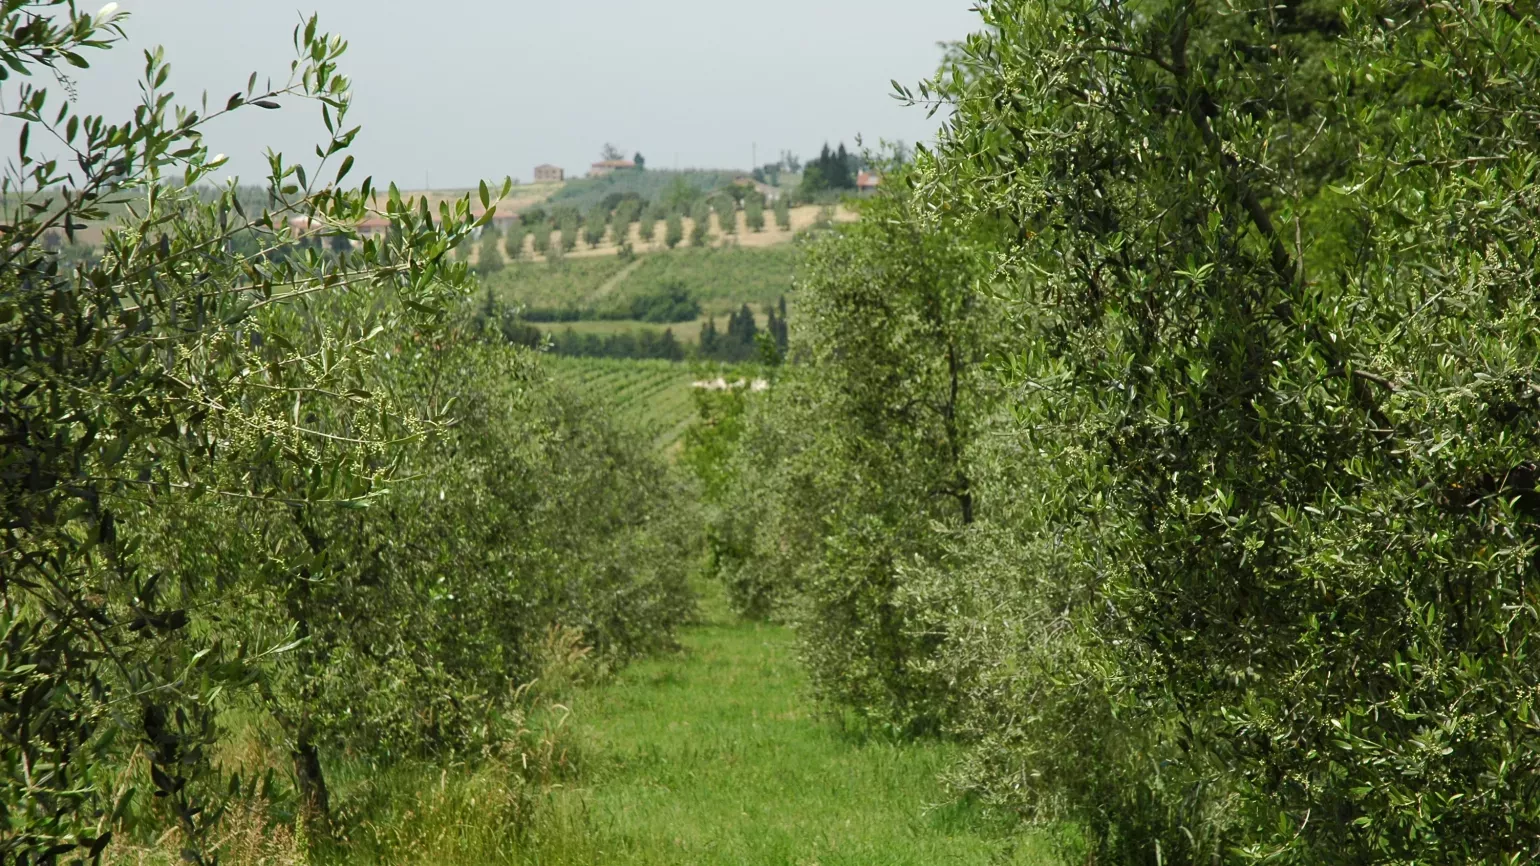 Rows of olive trees in Italy